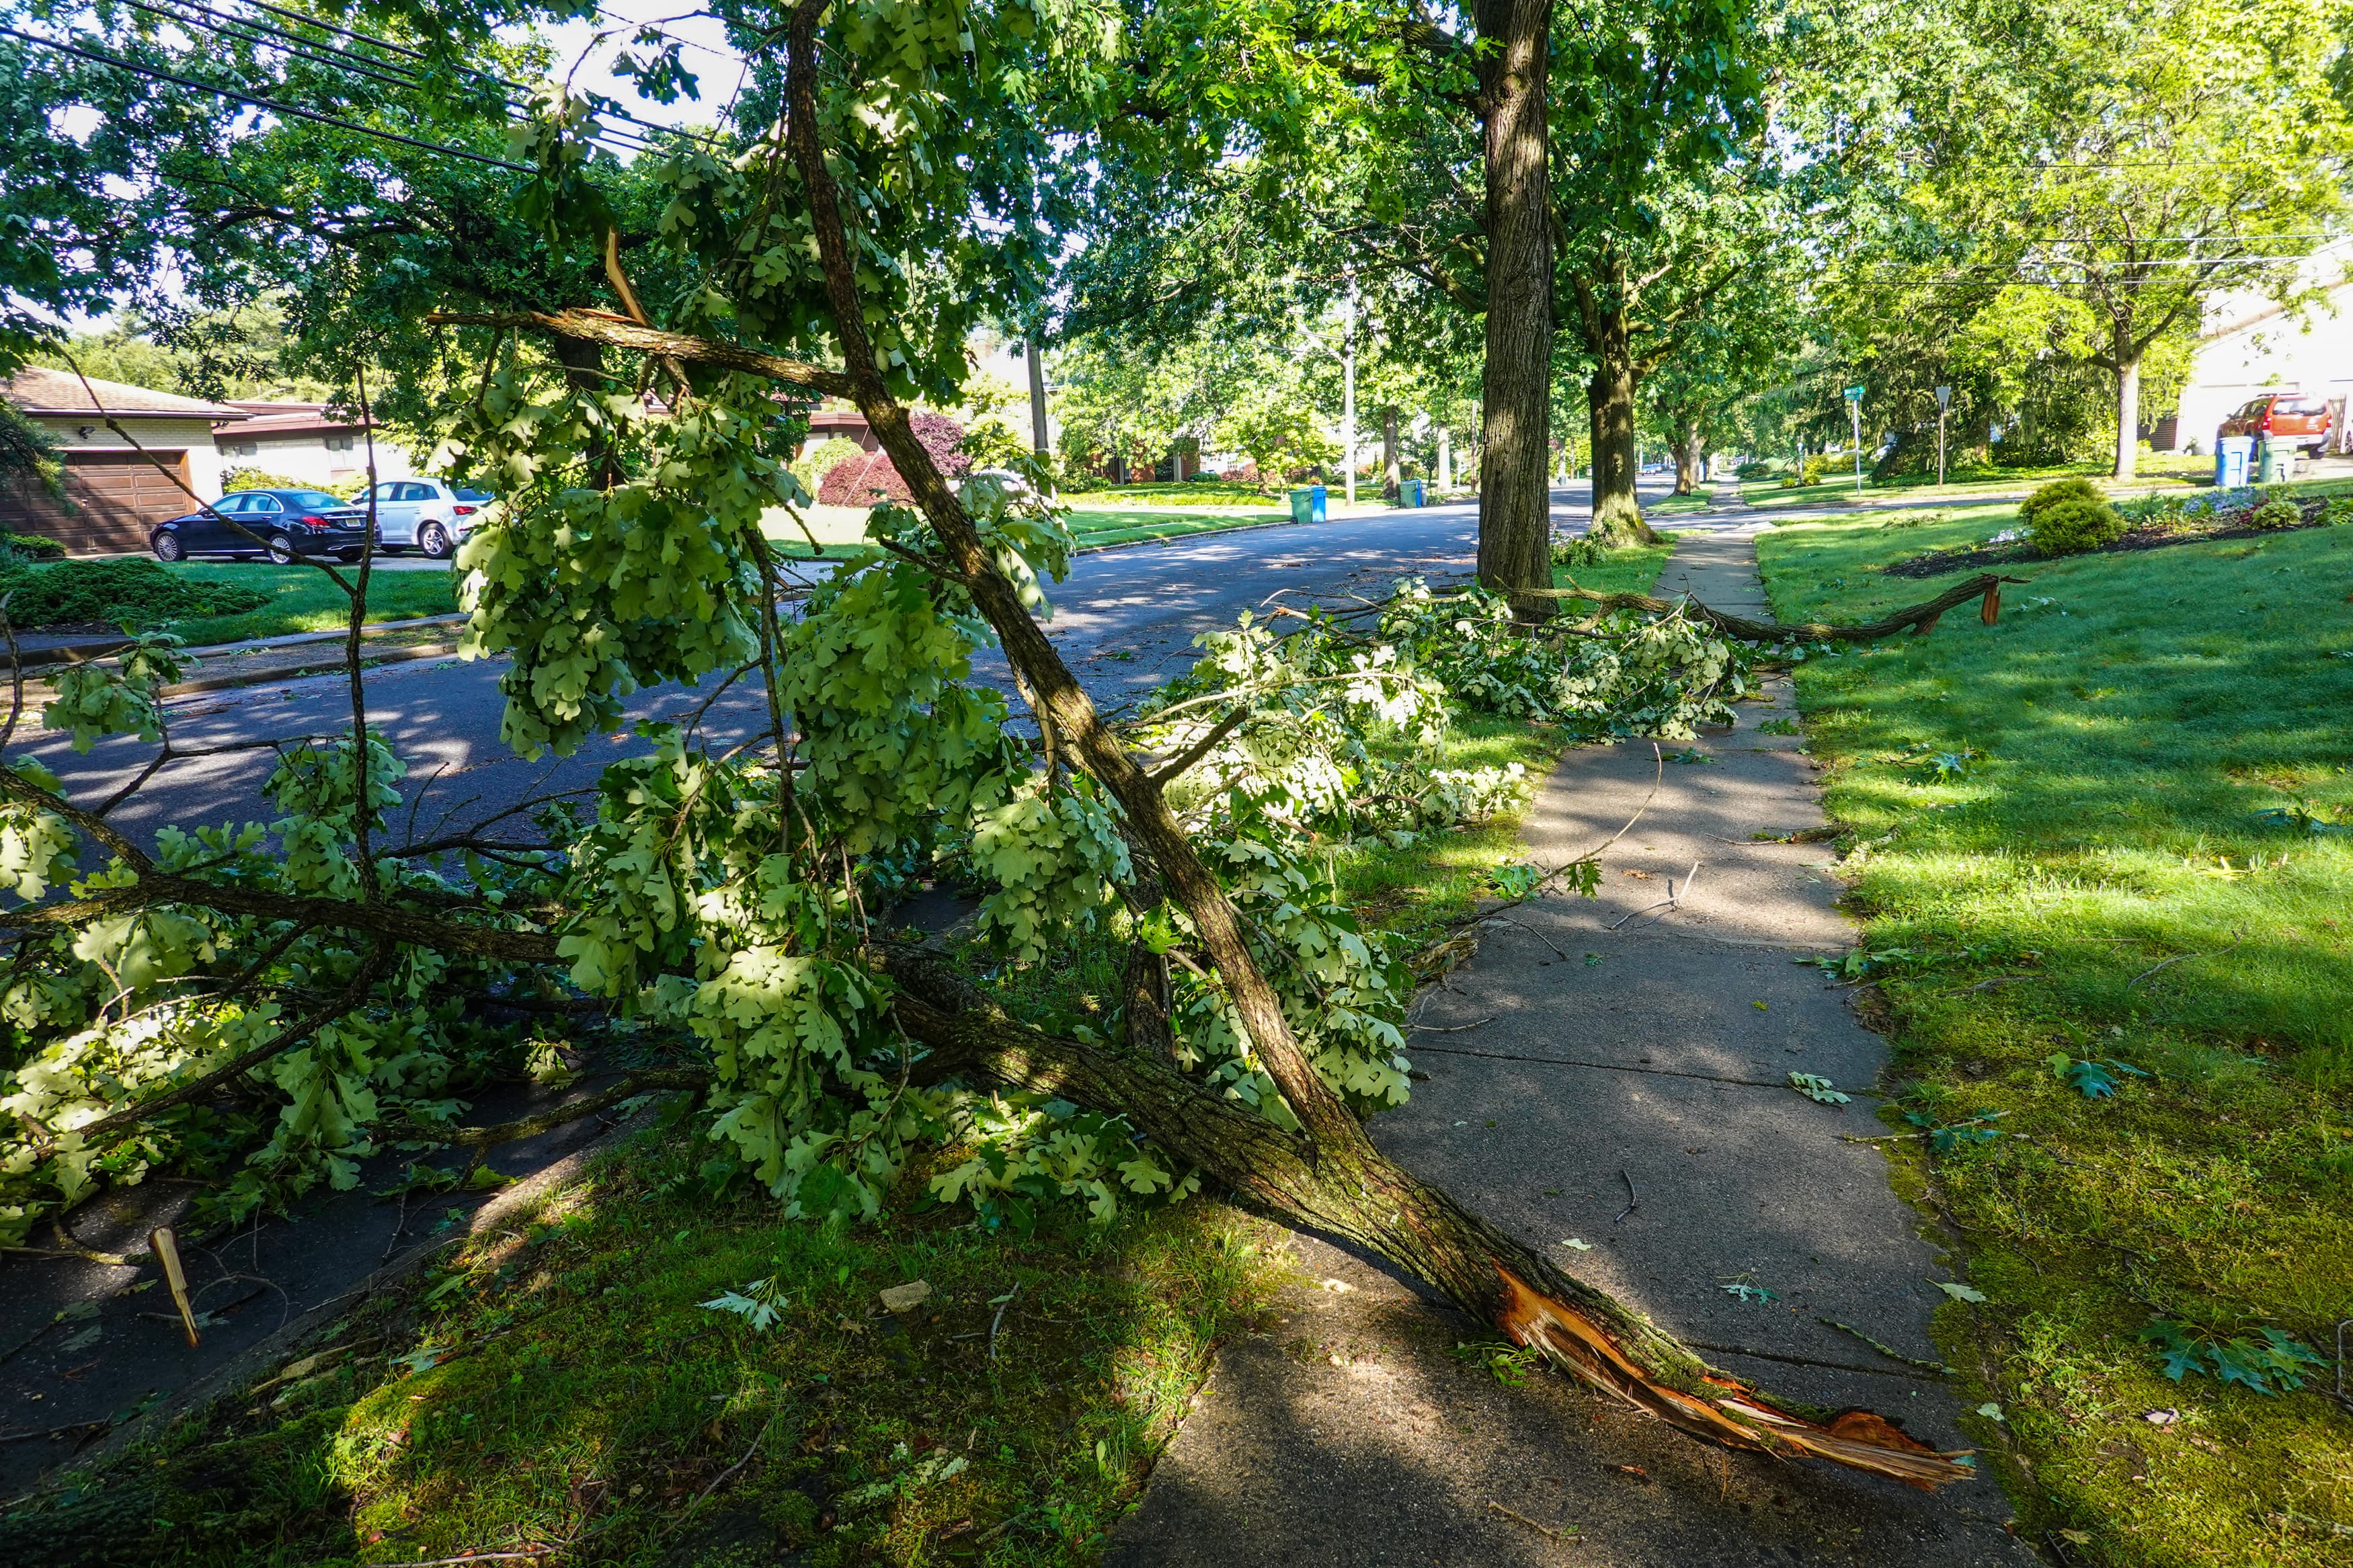 an image of branches laying on the ground after a storm